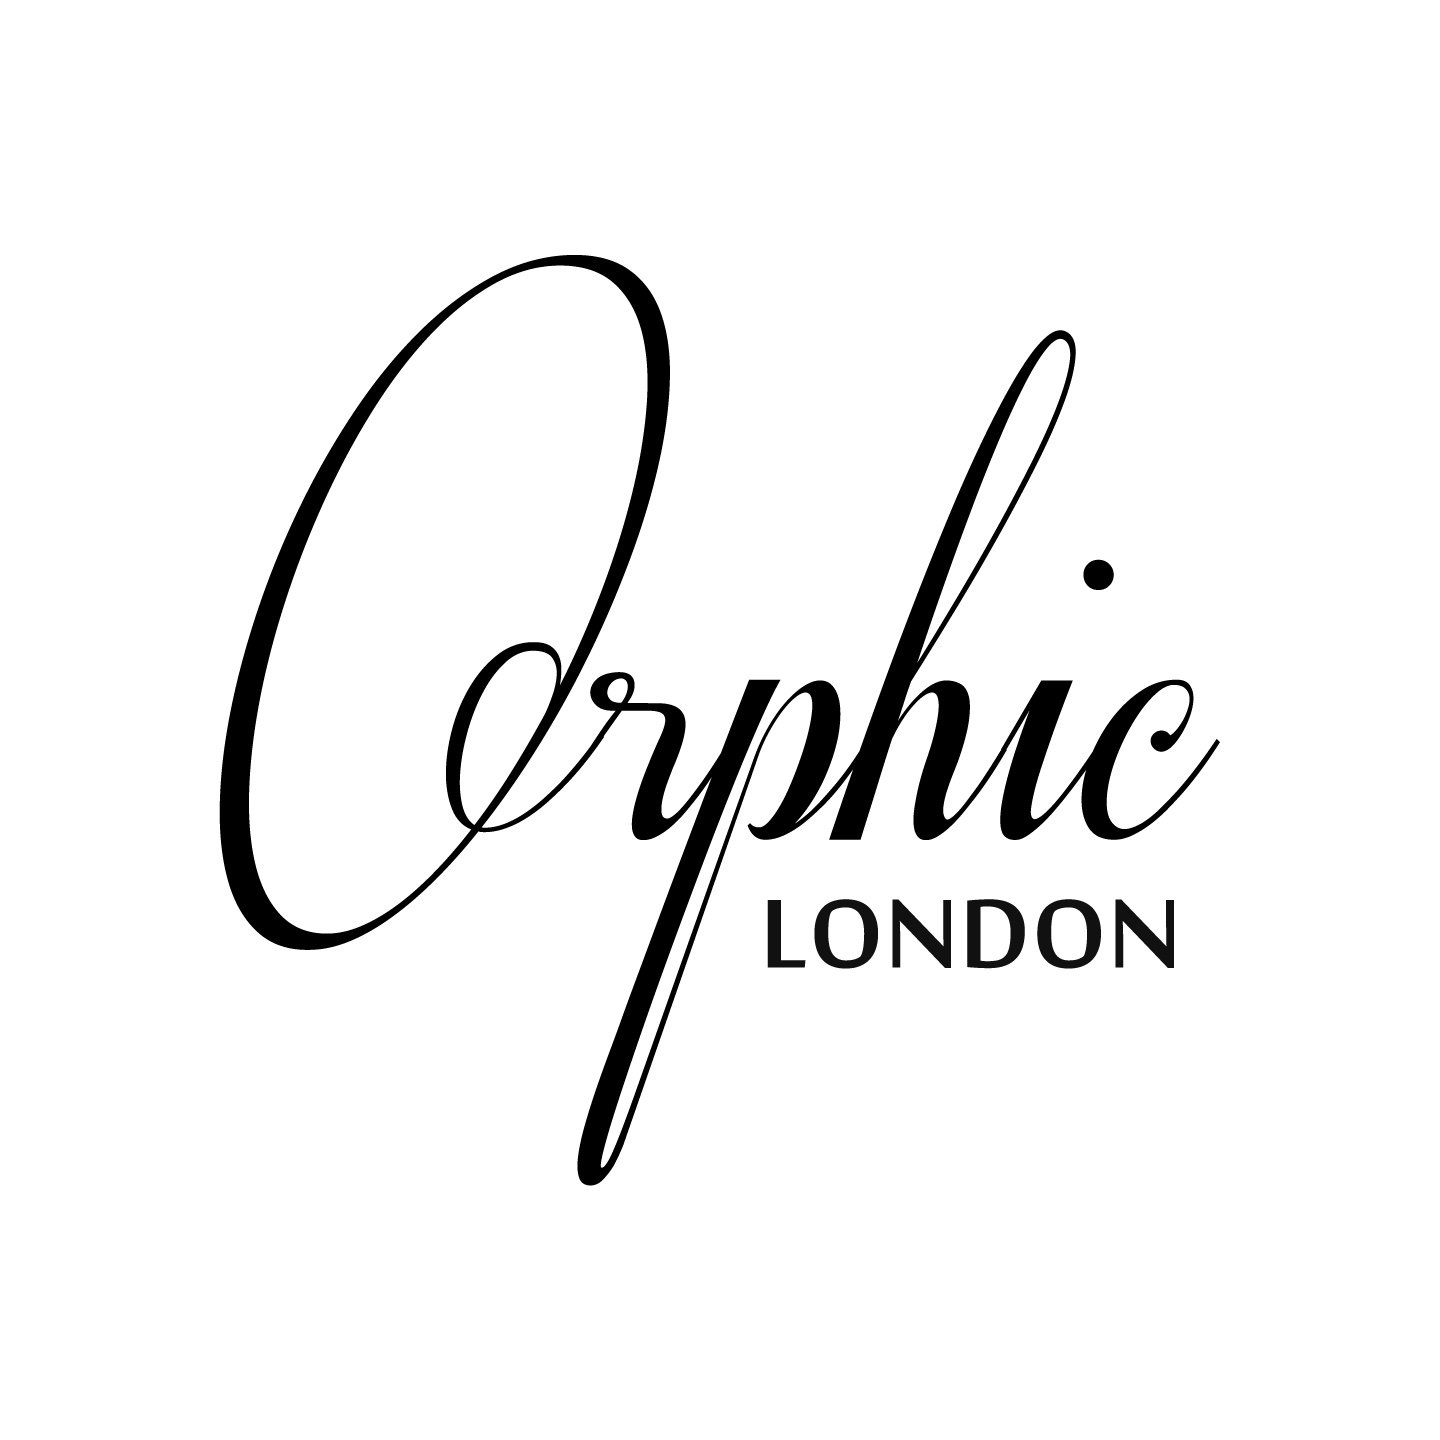 Orphic London is about style.
The brand represents a strong, independent, sexy and confident woman who knows what she wants and is not scared to get it.